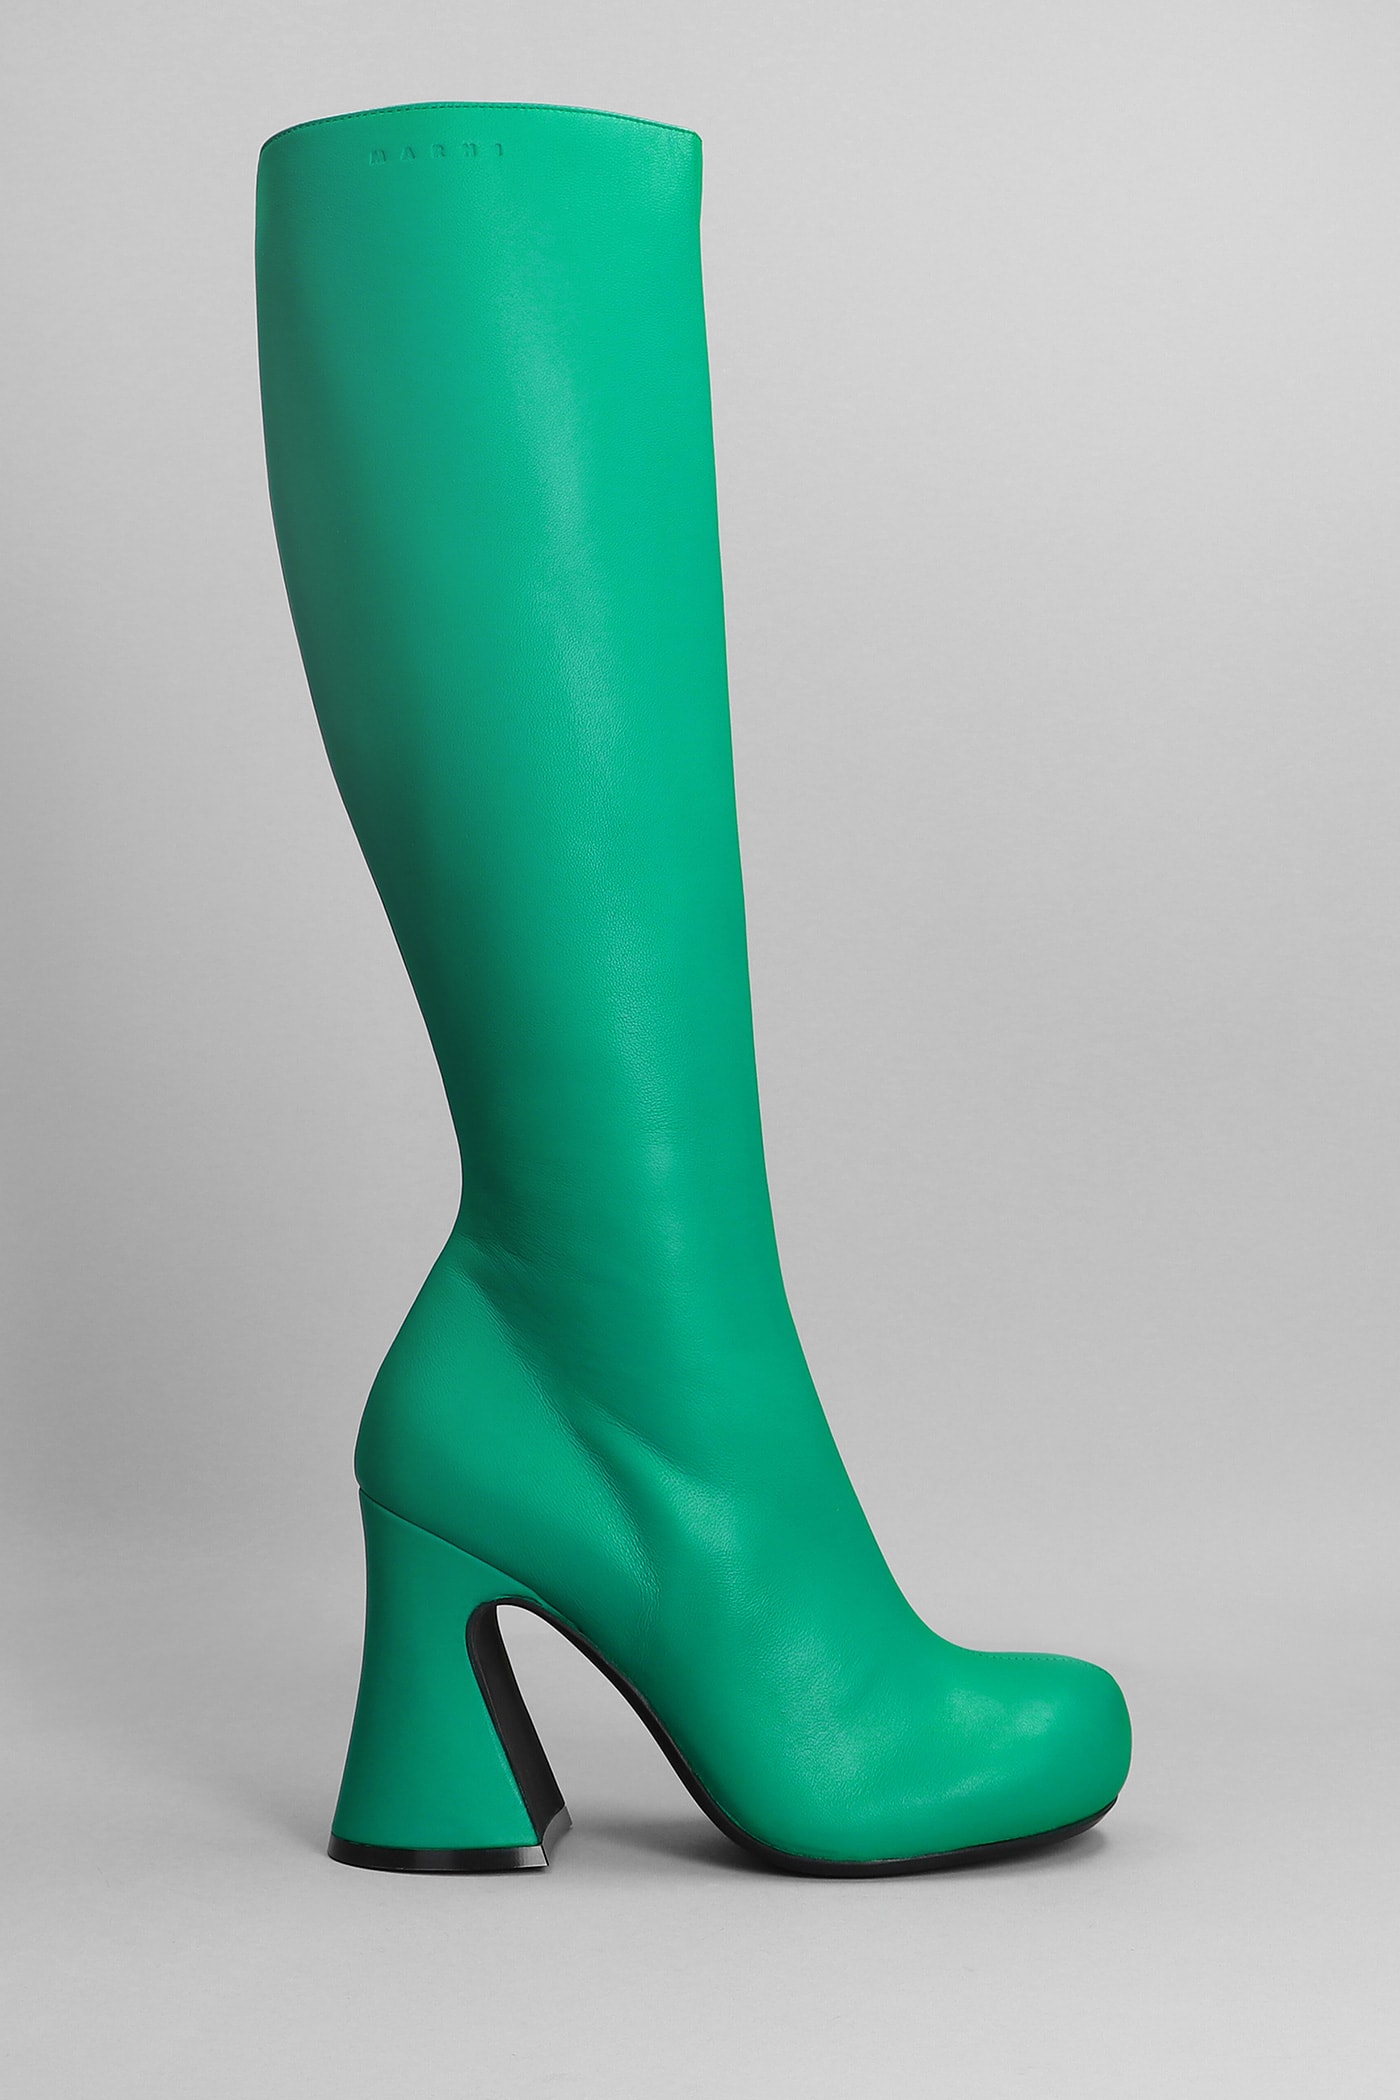 Marni High Heels Boots In Green Leather